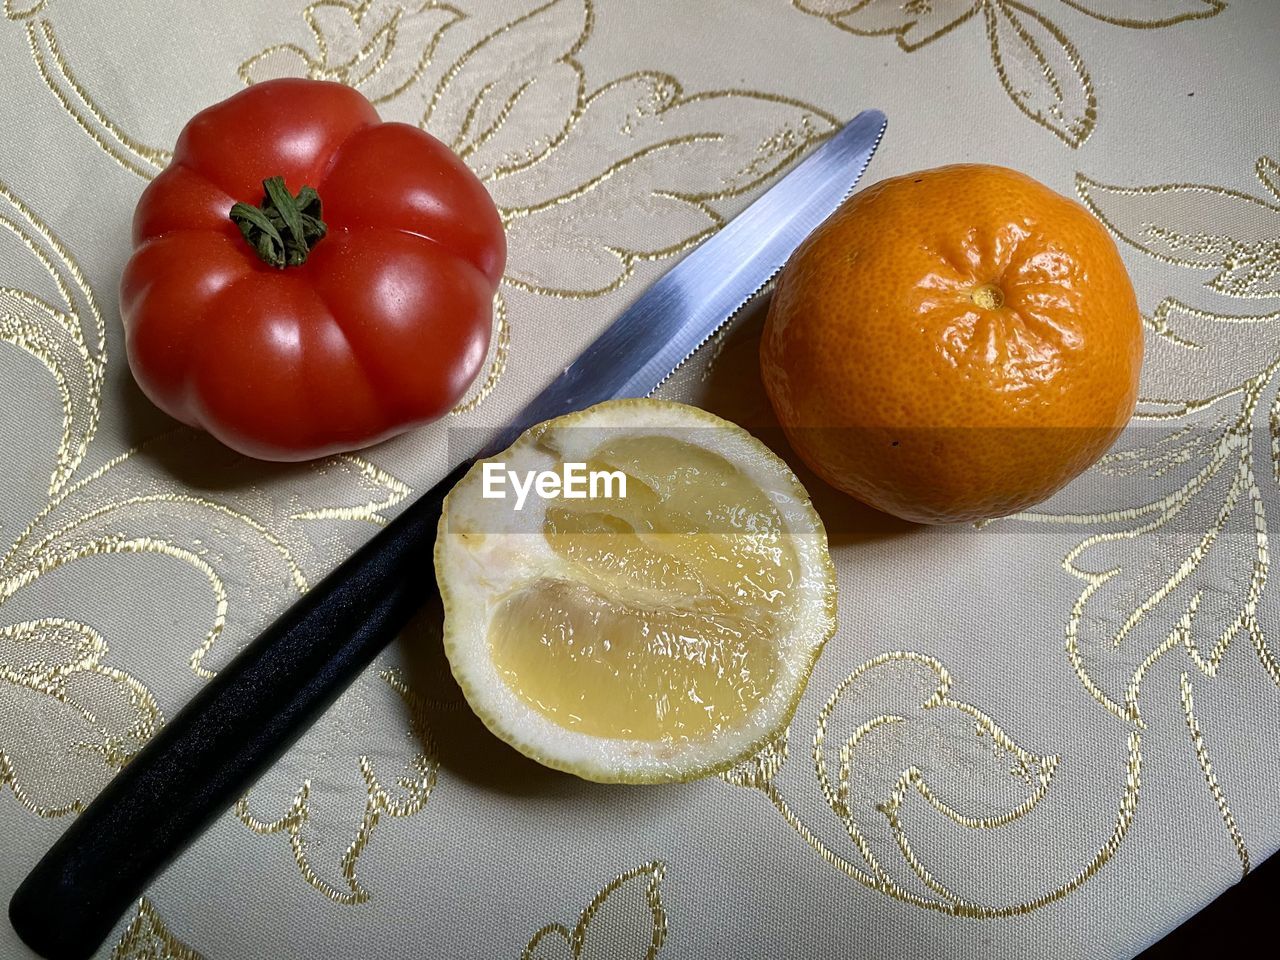 food, food and drink, plant, fruit, healthy eating, freshness, produce, wellbeing, citrus, citrus fruit, high angle view, indoors, tomato, still life, clementine, no people, table, vegetable, lemon, directly above, tangerine